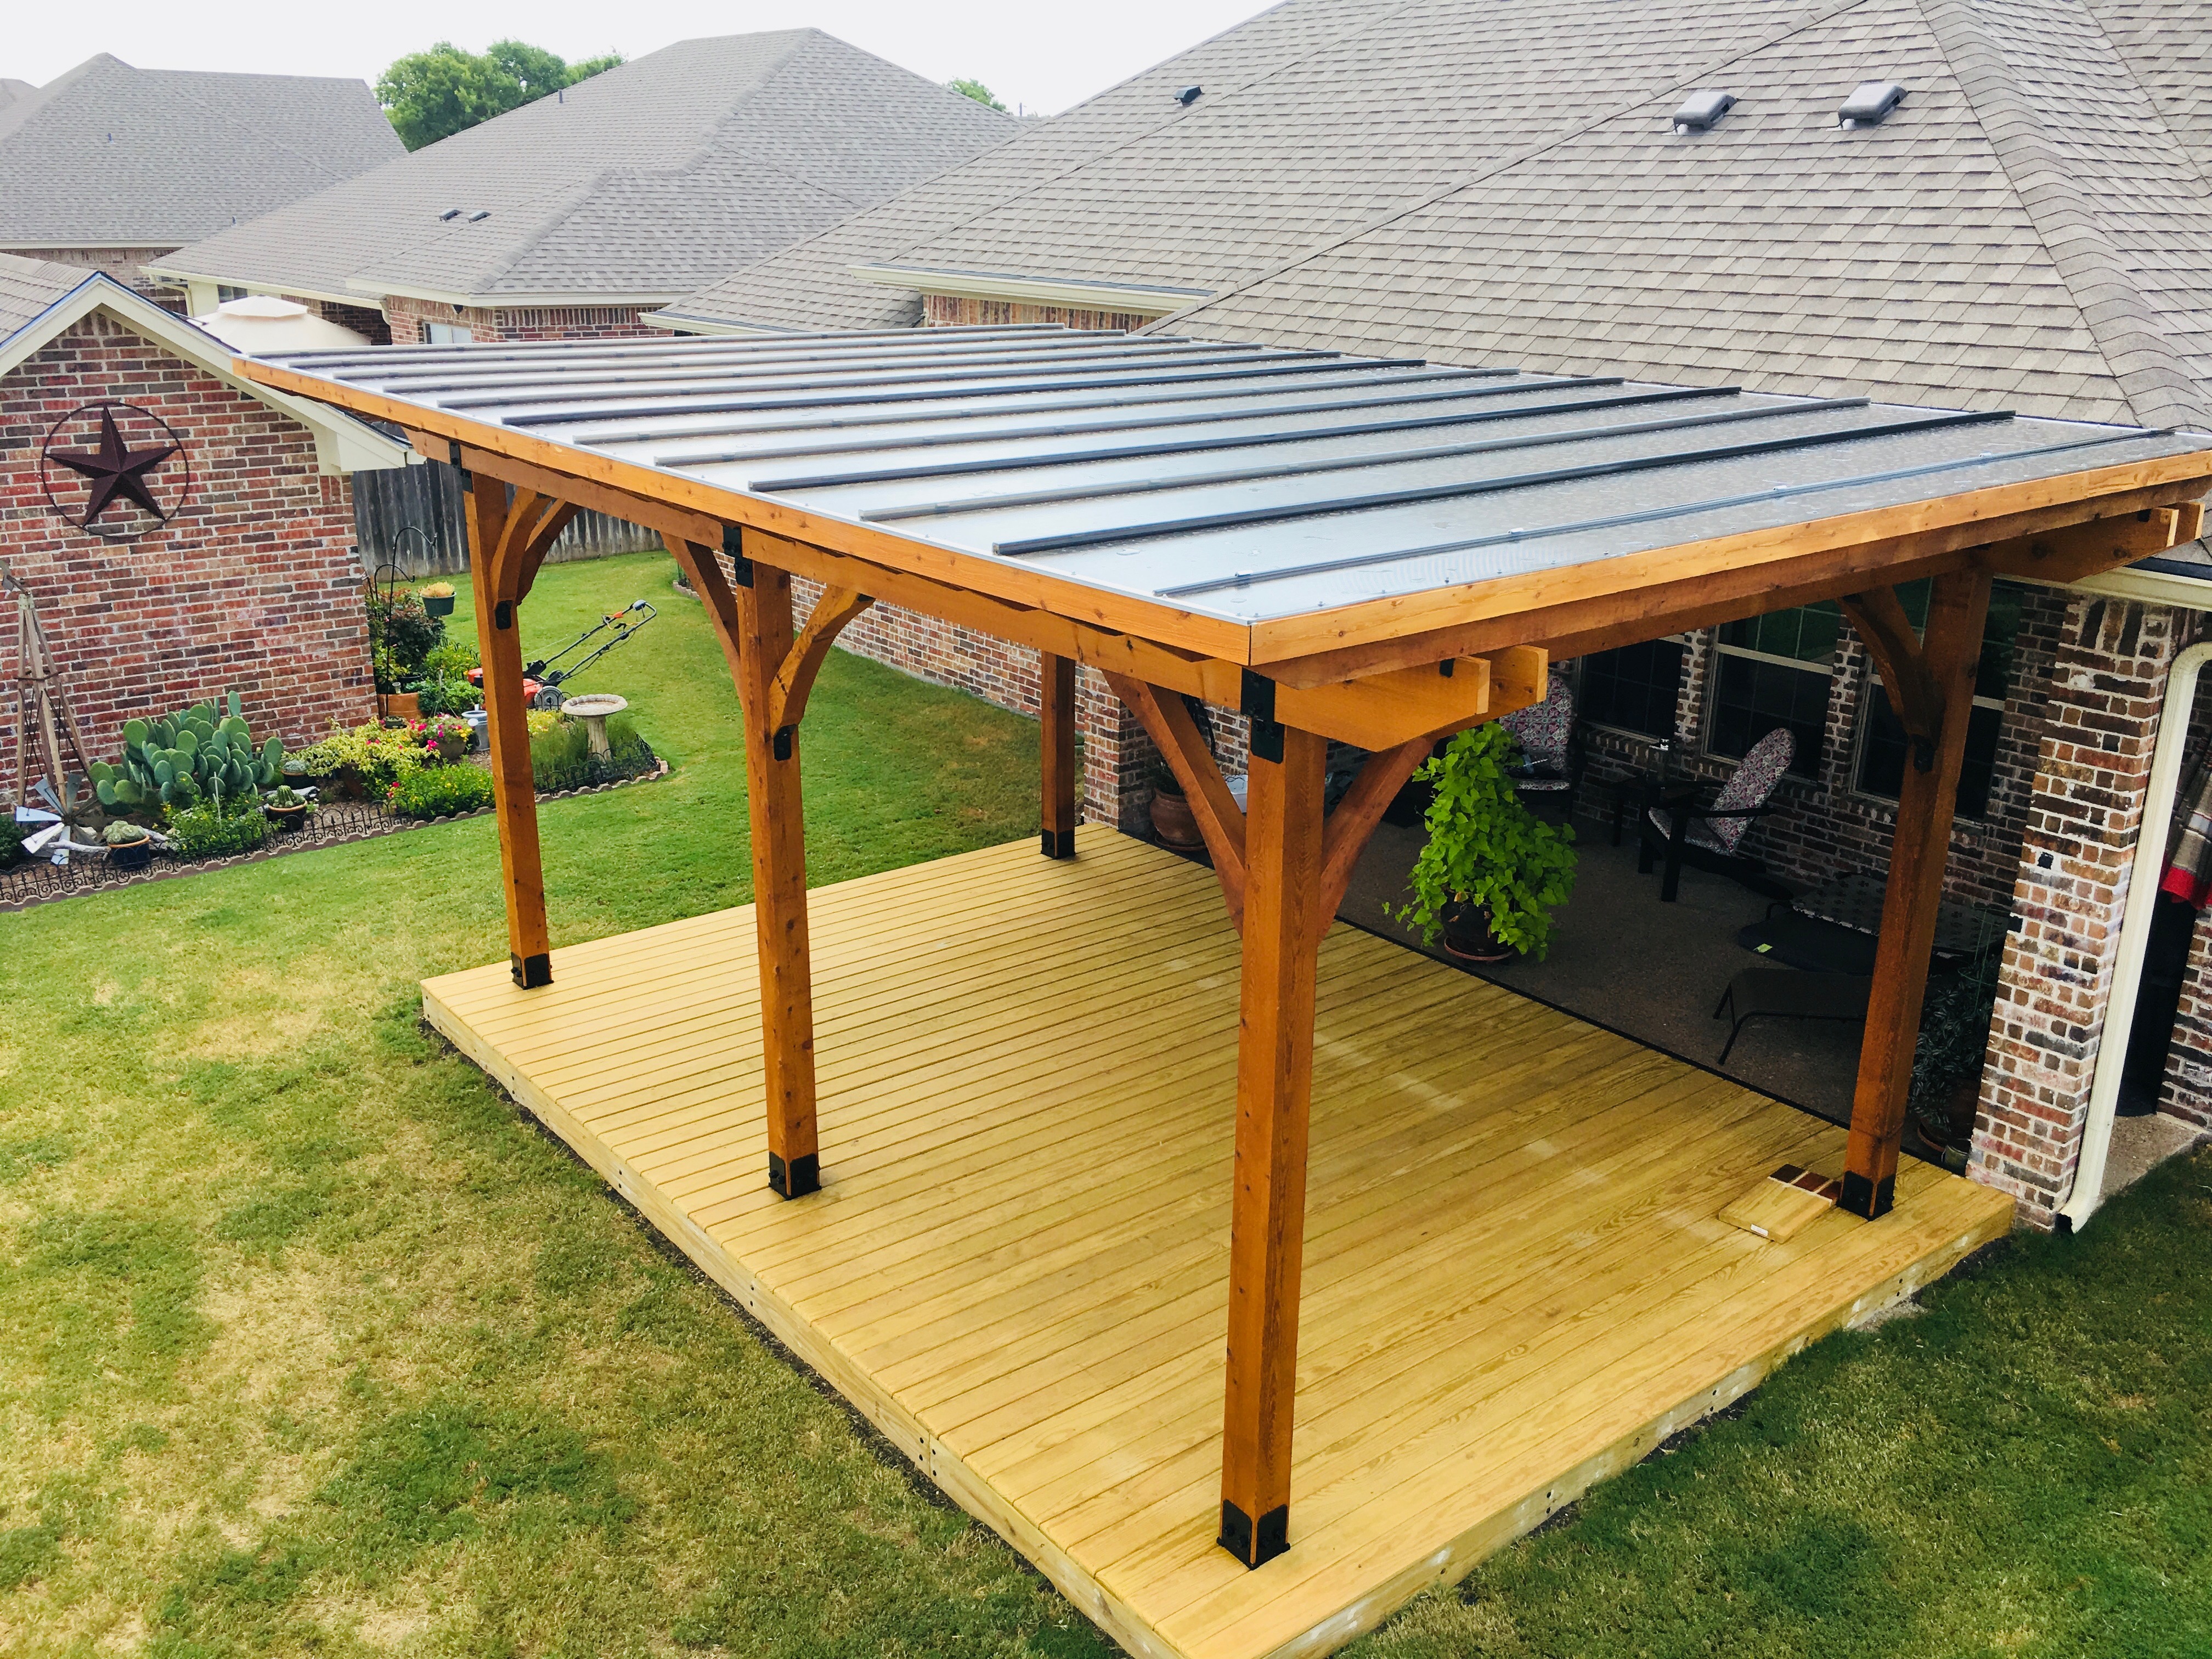 cusom pergola with metal roof and deck